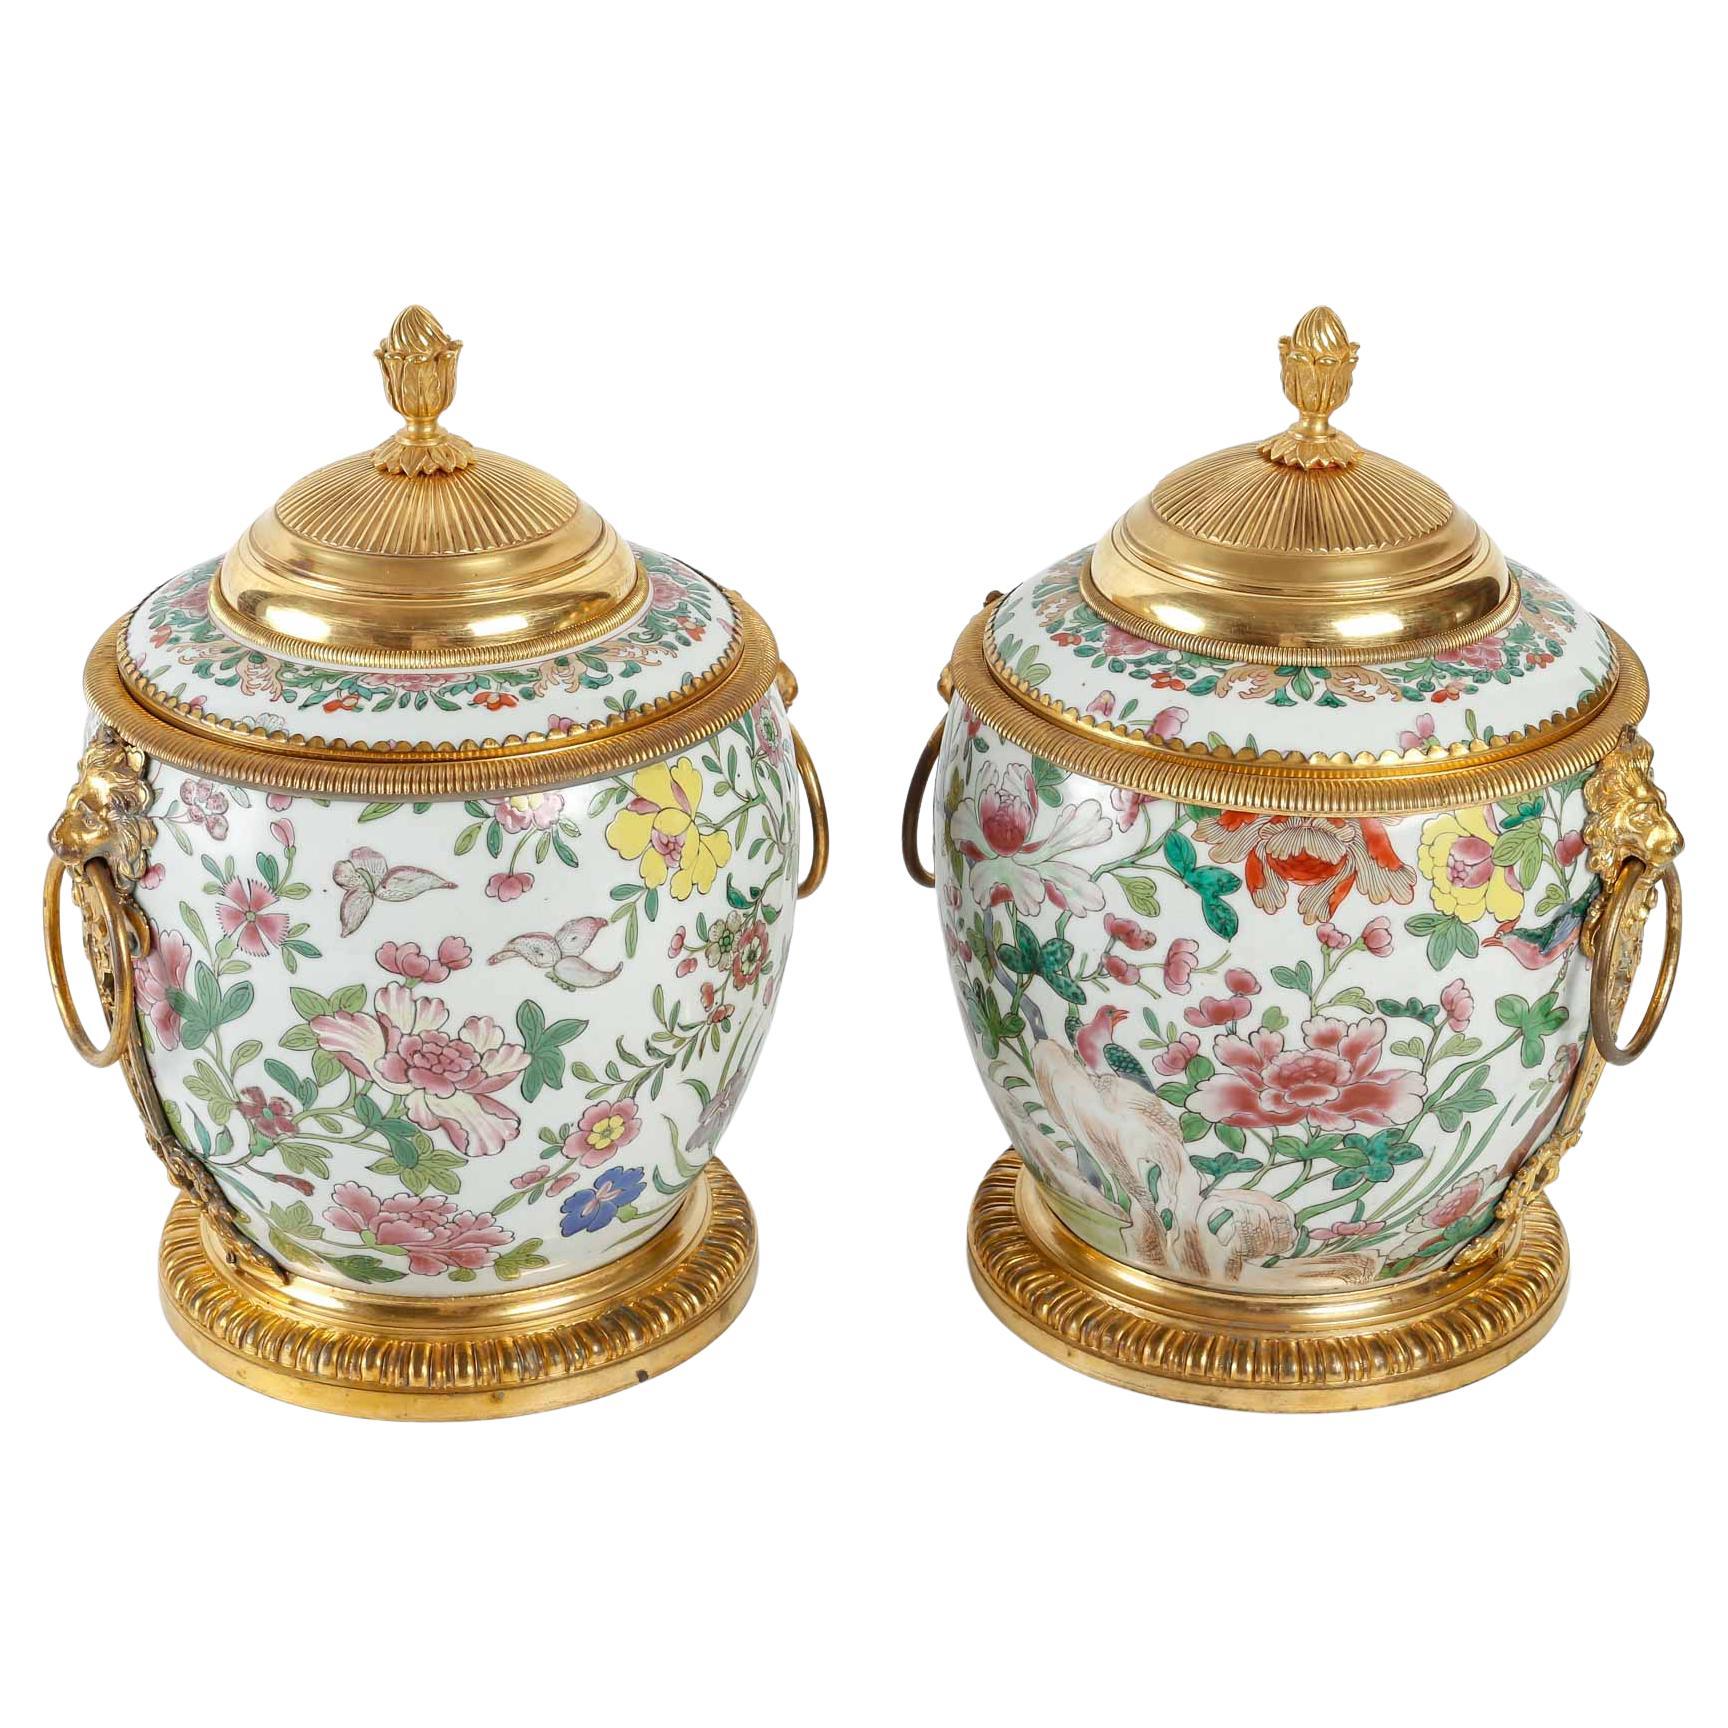  A French Regence Style Ormolu-Mounted Chinese Porcelain Pair of Ginger Jar